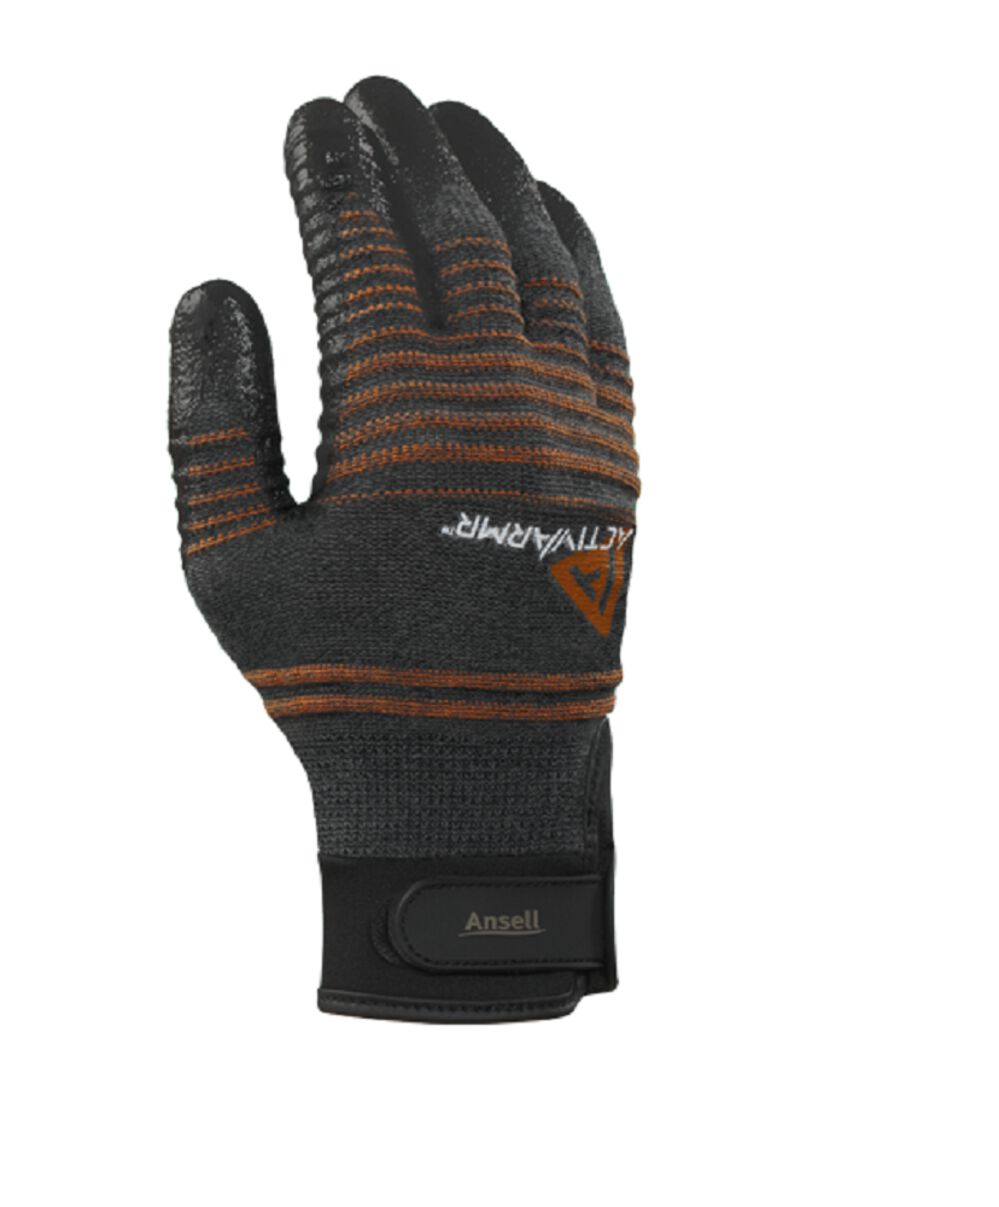 Ansell Protective Products ActivArmr X-Large Black Foam Nitrile Cut Resistant Gloves